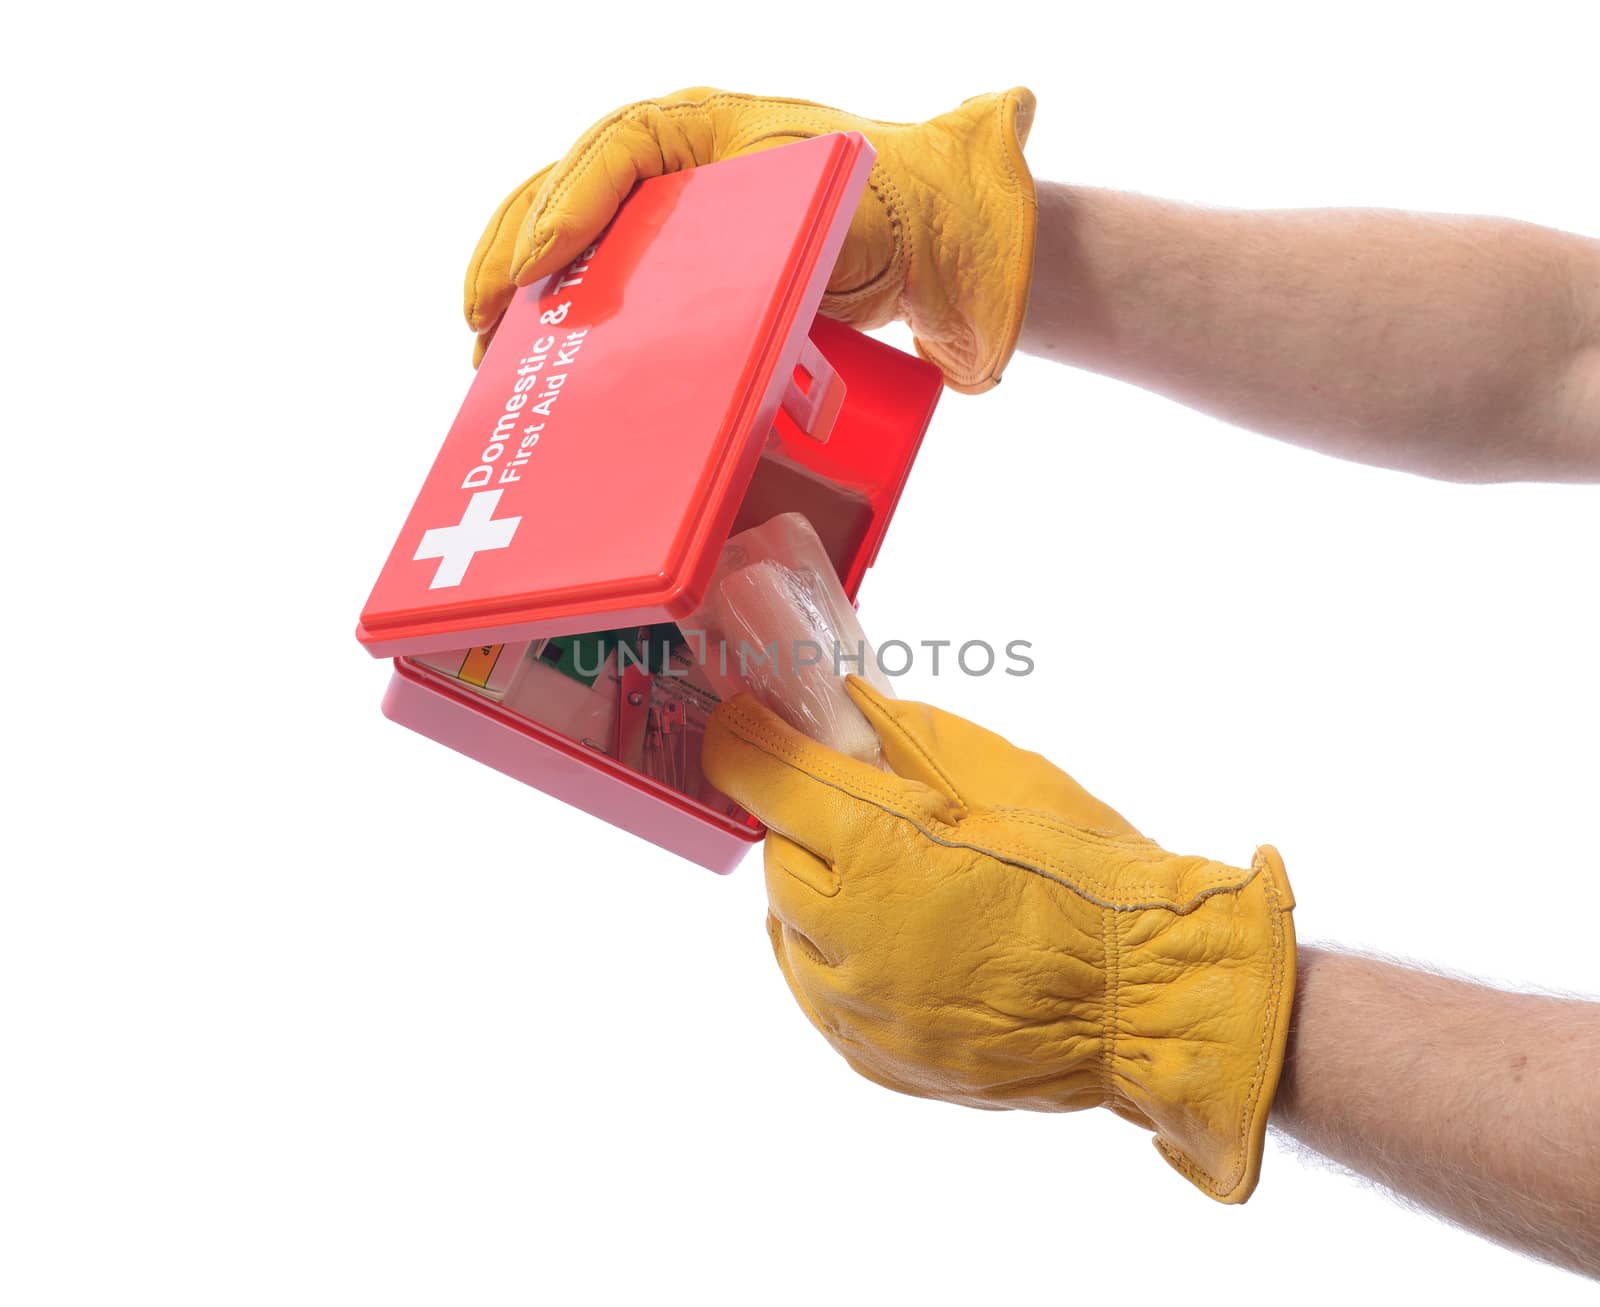 construction worker with glove taking a bandage from a first aid box